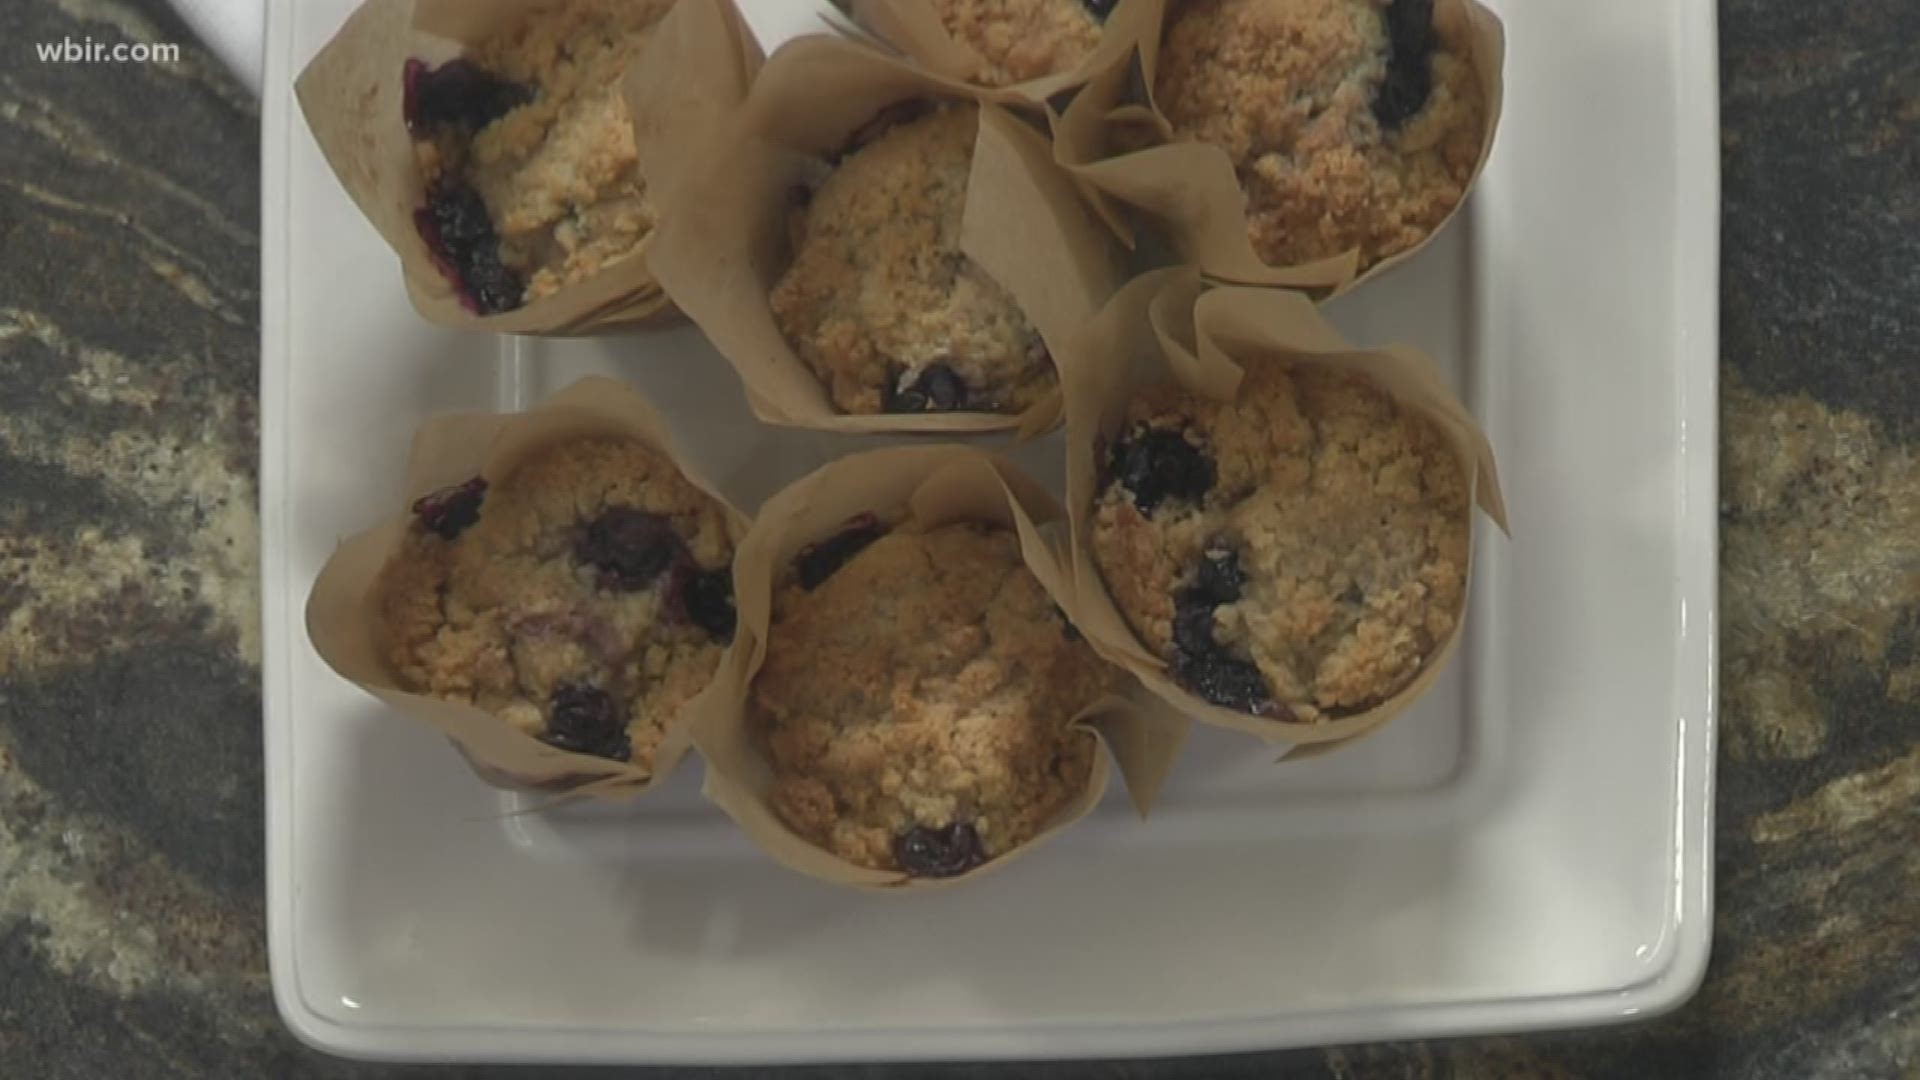 Tee Dedrick with Special Tee Cookes shares a recipe for a blueberry muffin crumble. For more about Tee visit her Special Tee Cookies Facebook page. Jan 10, 2019-4pm